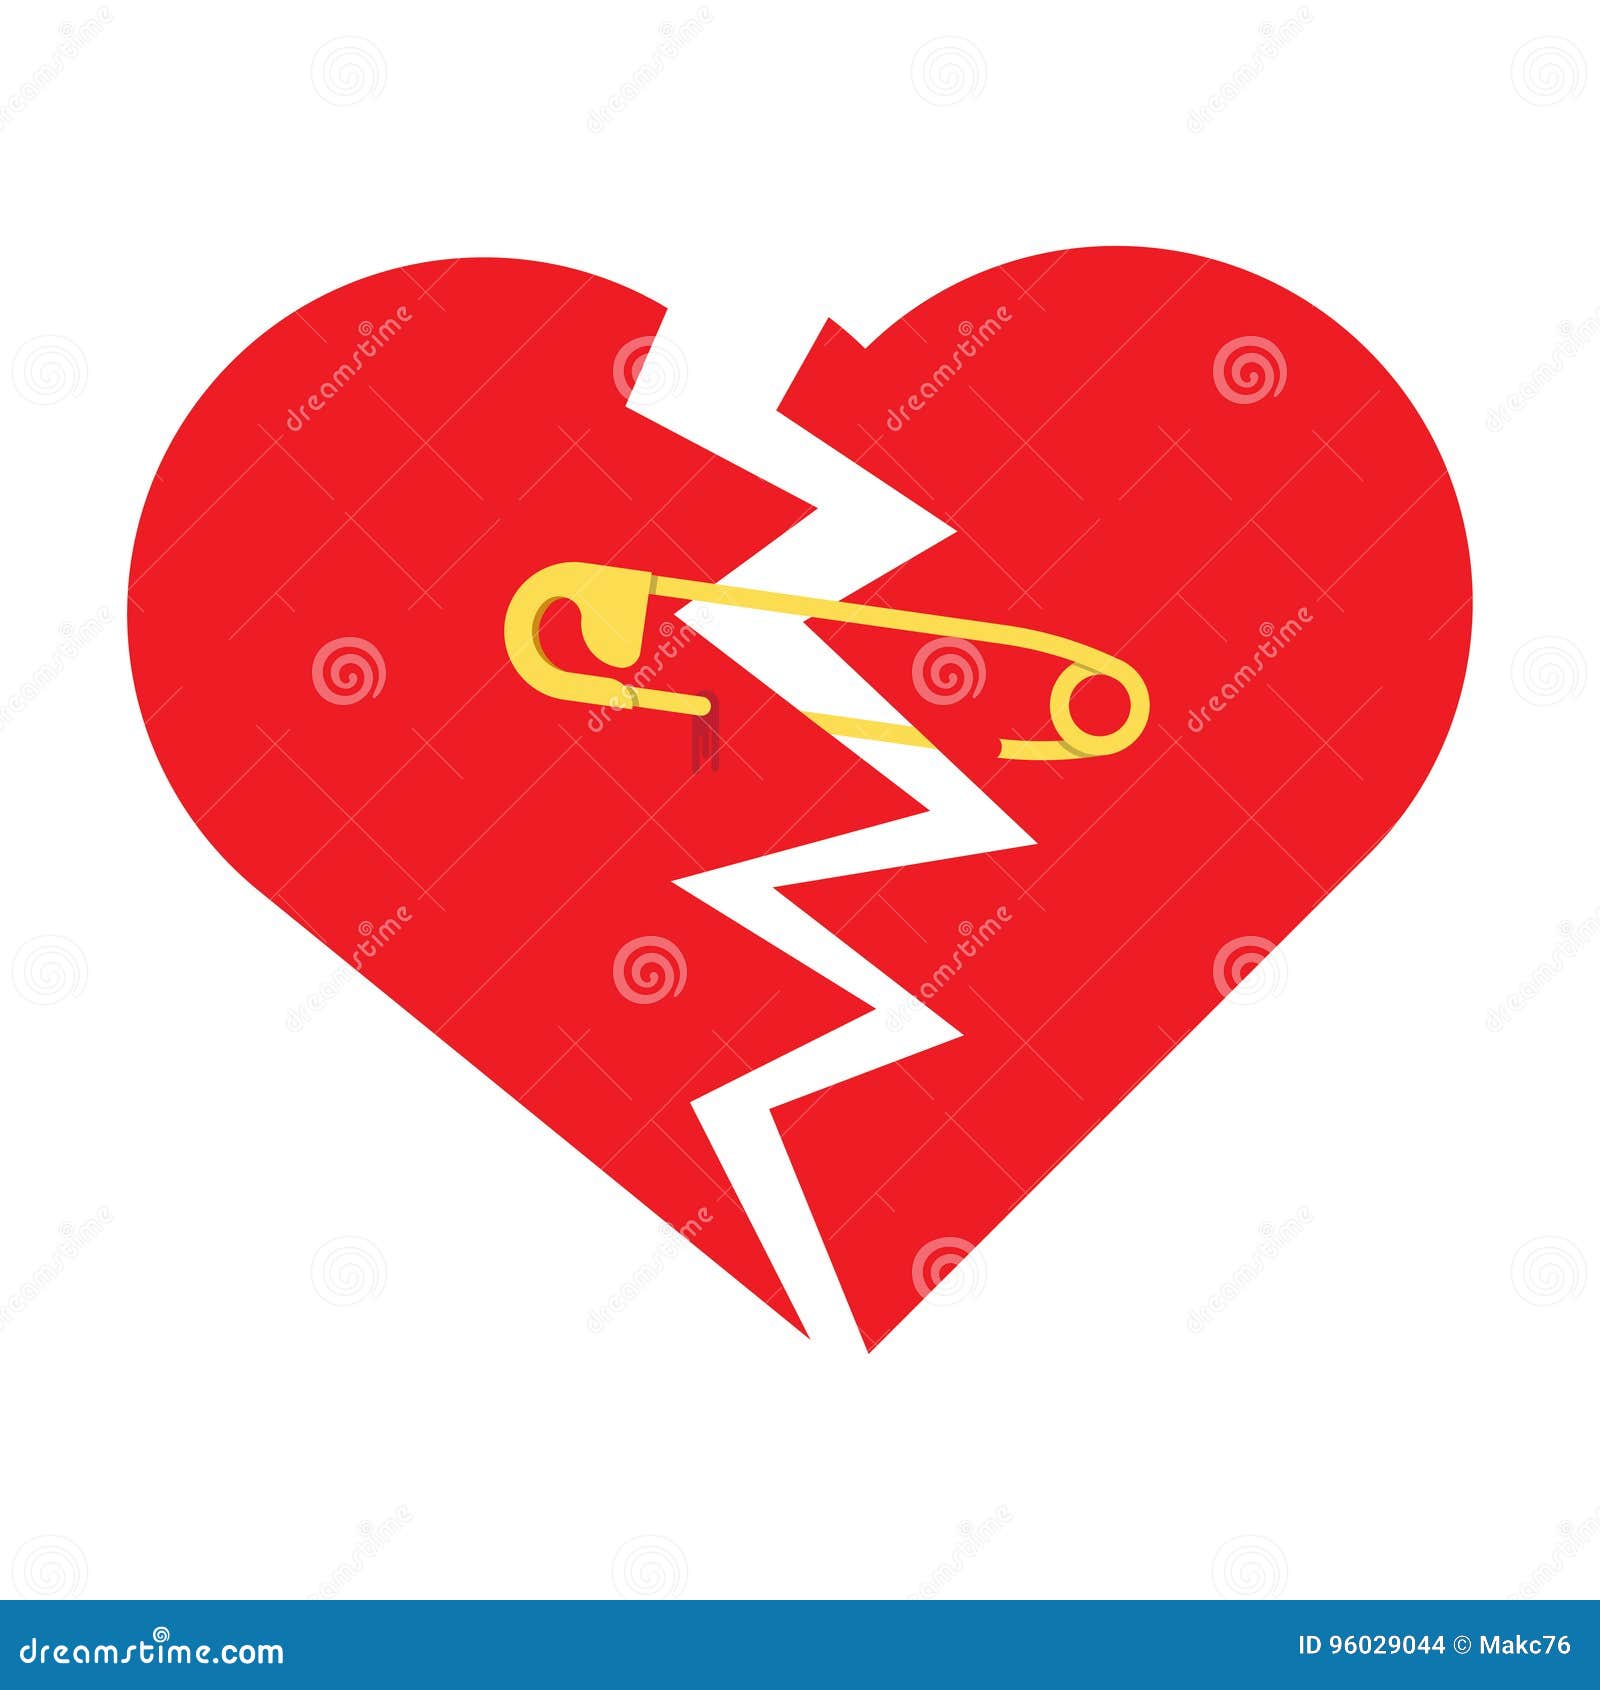 Torn heart with safety pin stock vector. Illustration of despair - 96029044